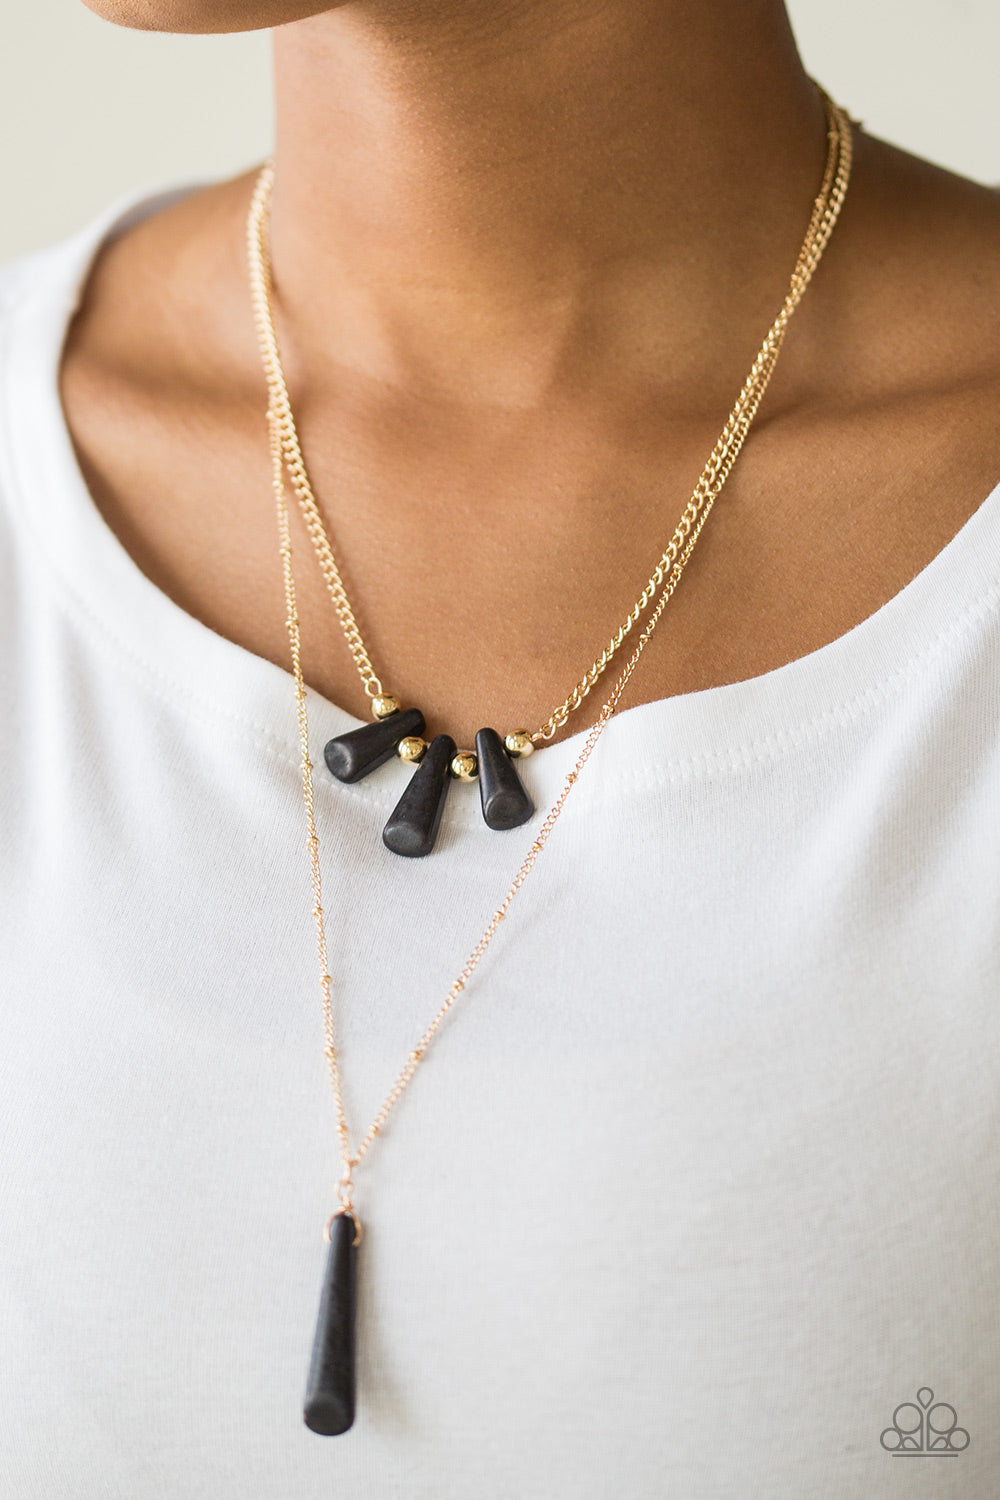 Paparazzi Basic Groundwork - Black Stones - Gold Necklace and matching Earrings - $5 Jewelry with Ashley Swint